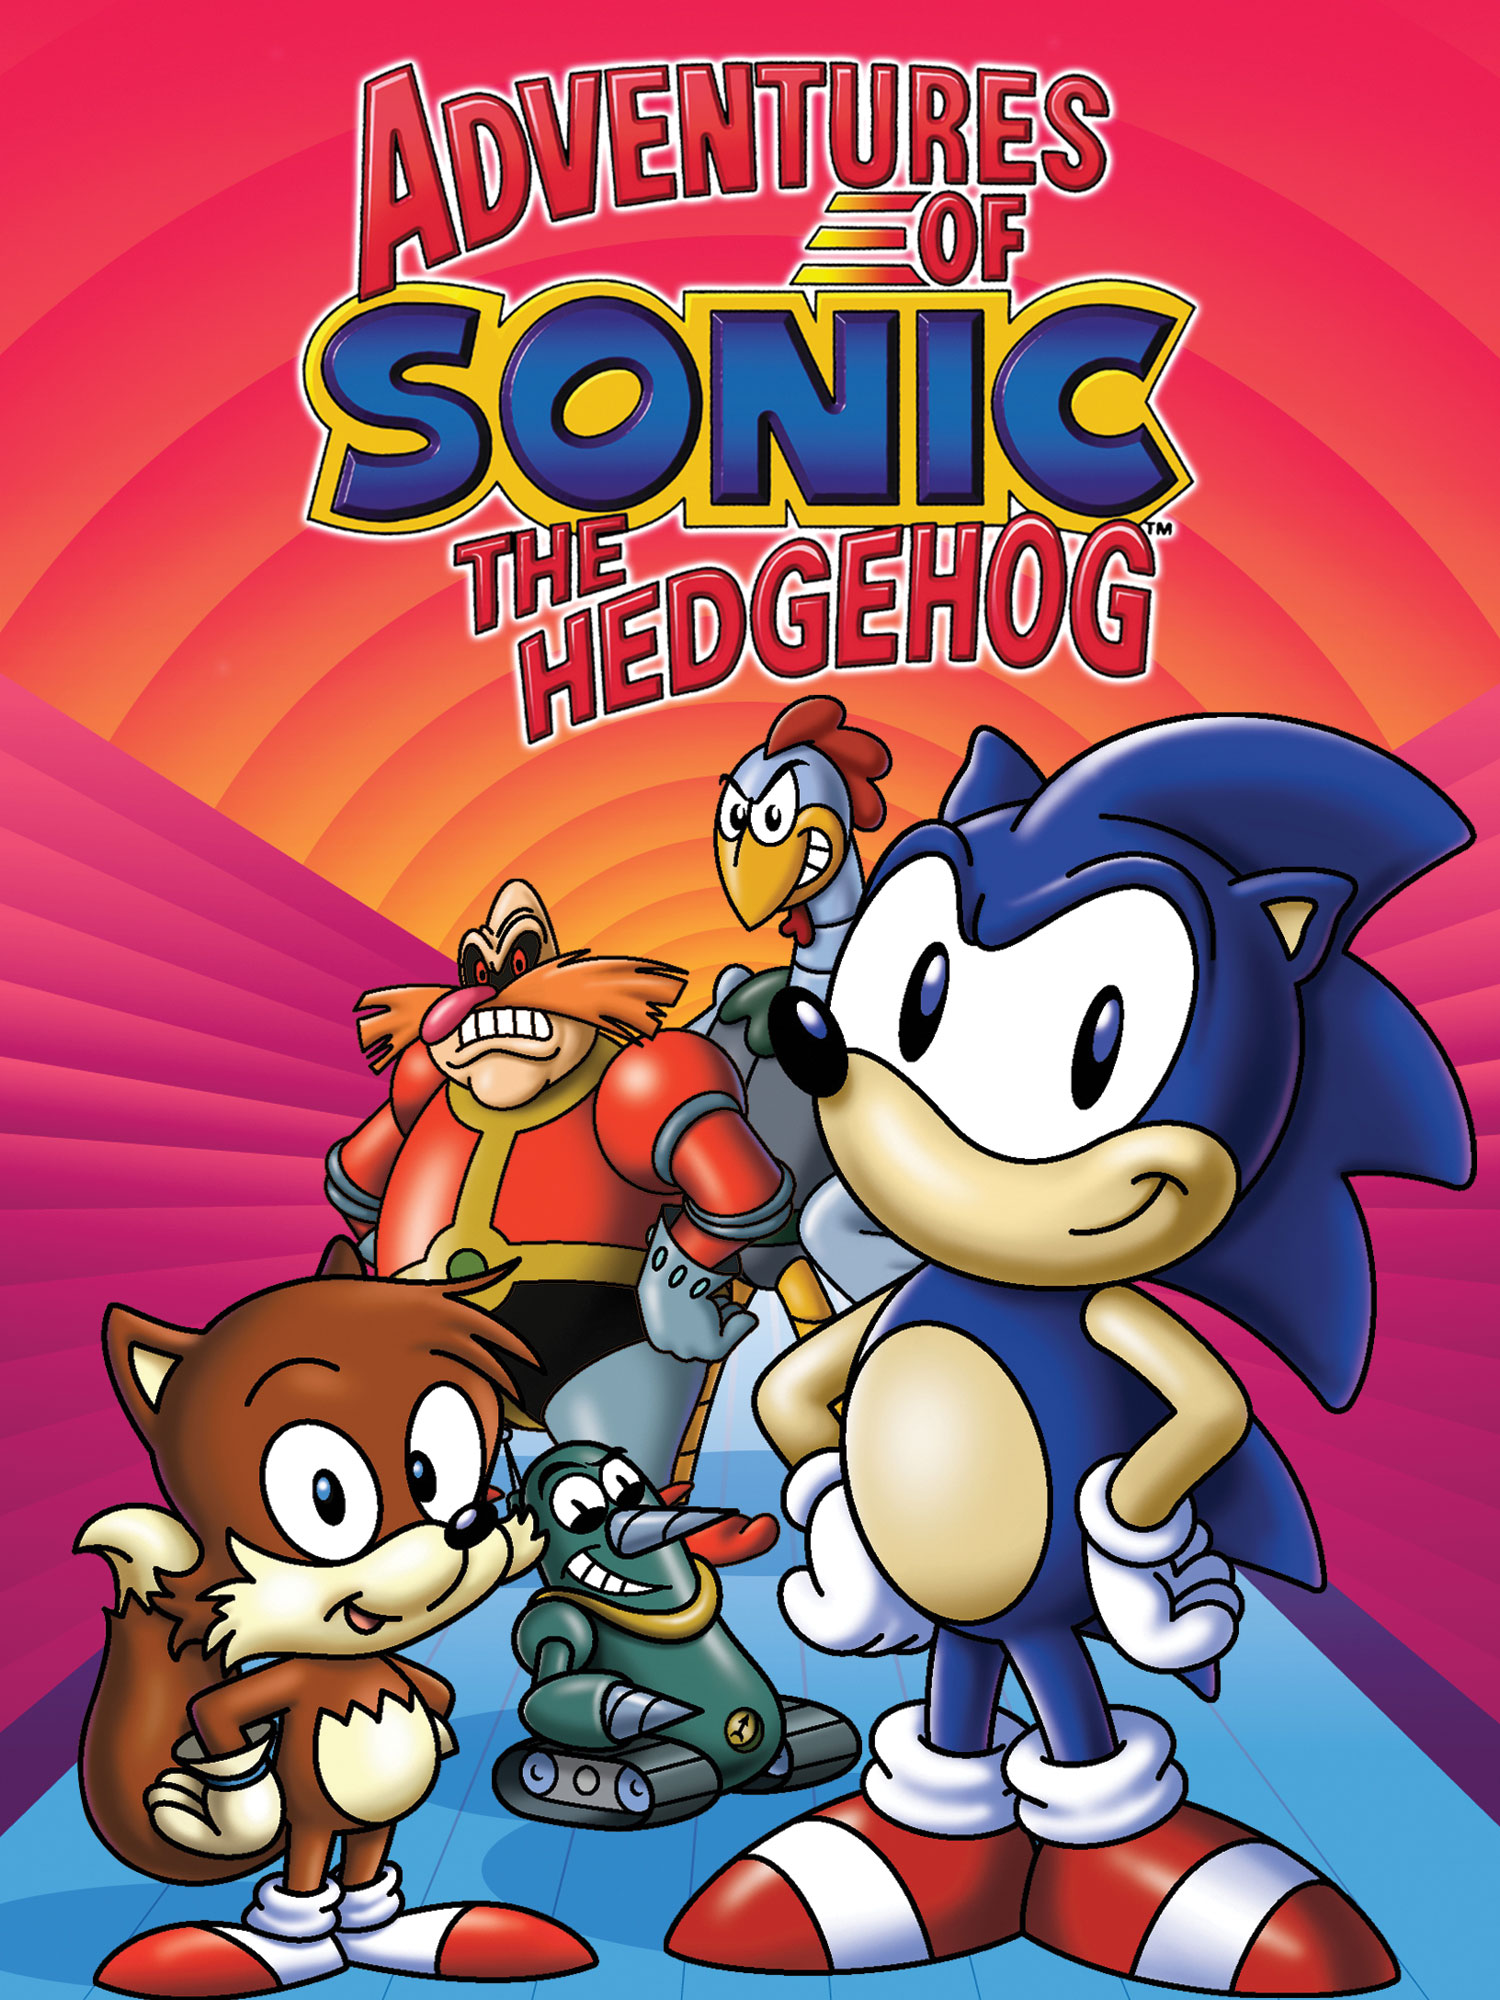 Adventures of Sonic the Hedgehog Coming to Blu-ray